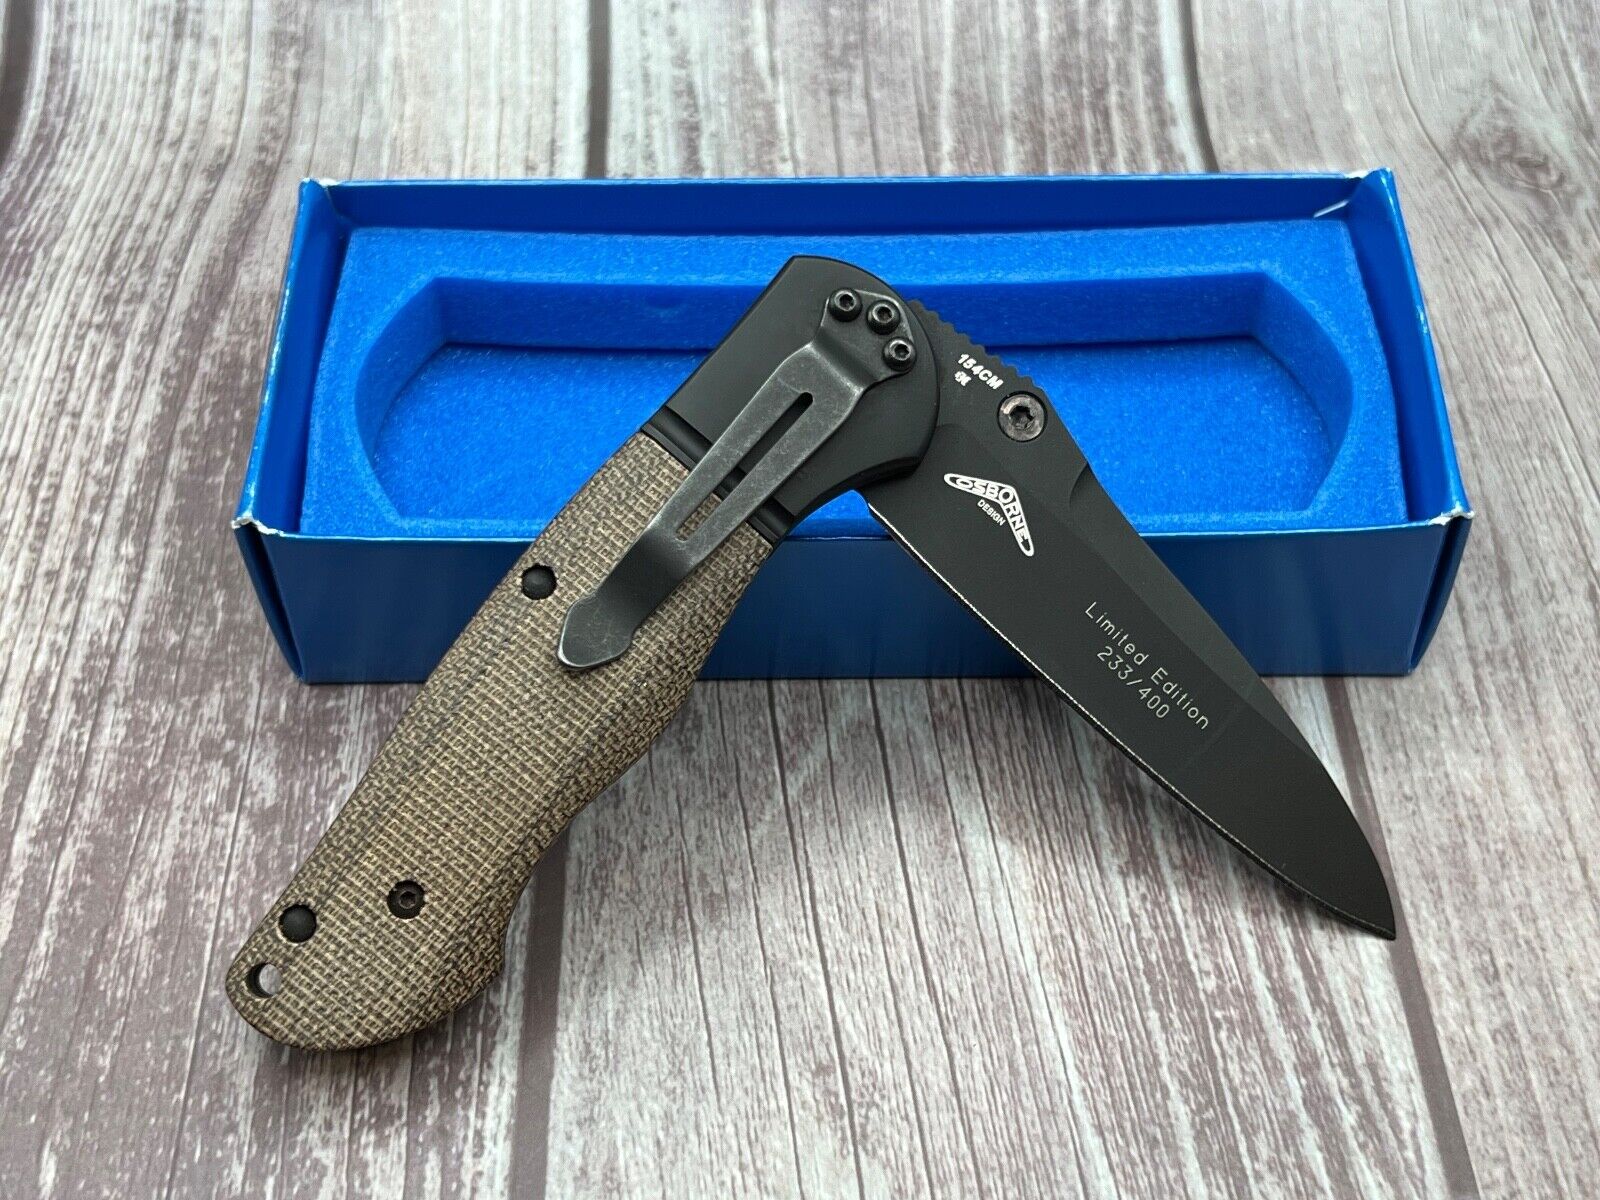 BenchMade 670BK-600 APPARITION, Never Used, Limited edition 233/400, Rare find